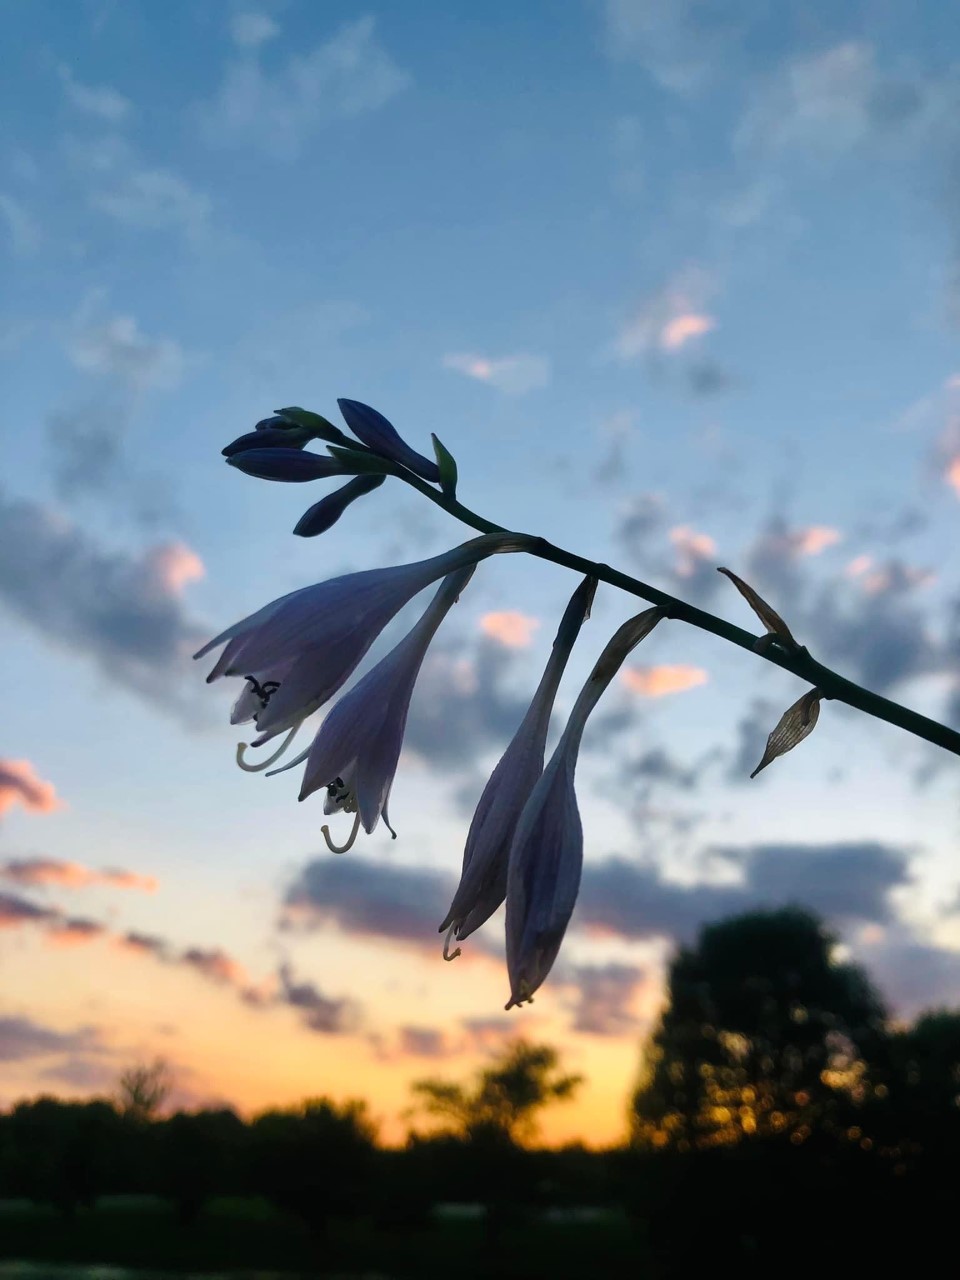 Flowers with sunset sky background - photo by E Horseman